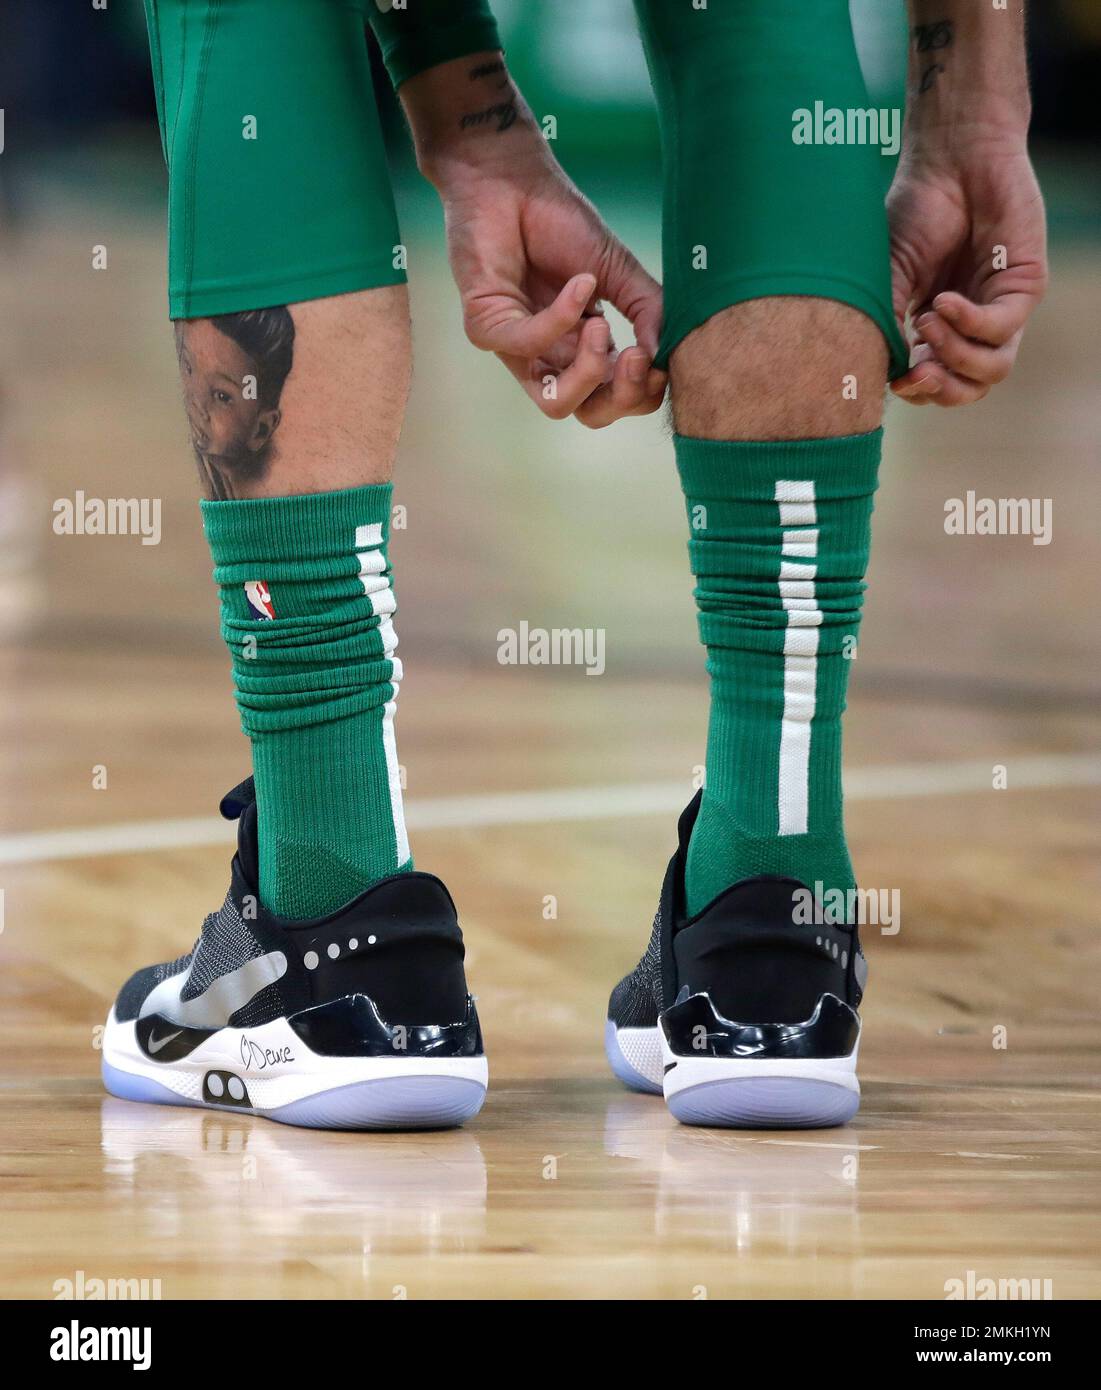 In this Feb. 7, 2019, photo, Boston Celtics forward Jayson Tatum adjusts  his knee sleeve during an NBA basketball game against the Los Angeles  Lakers in Boston. He is wearing Nike's latest